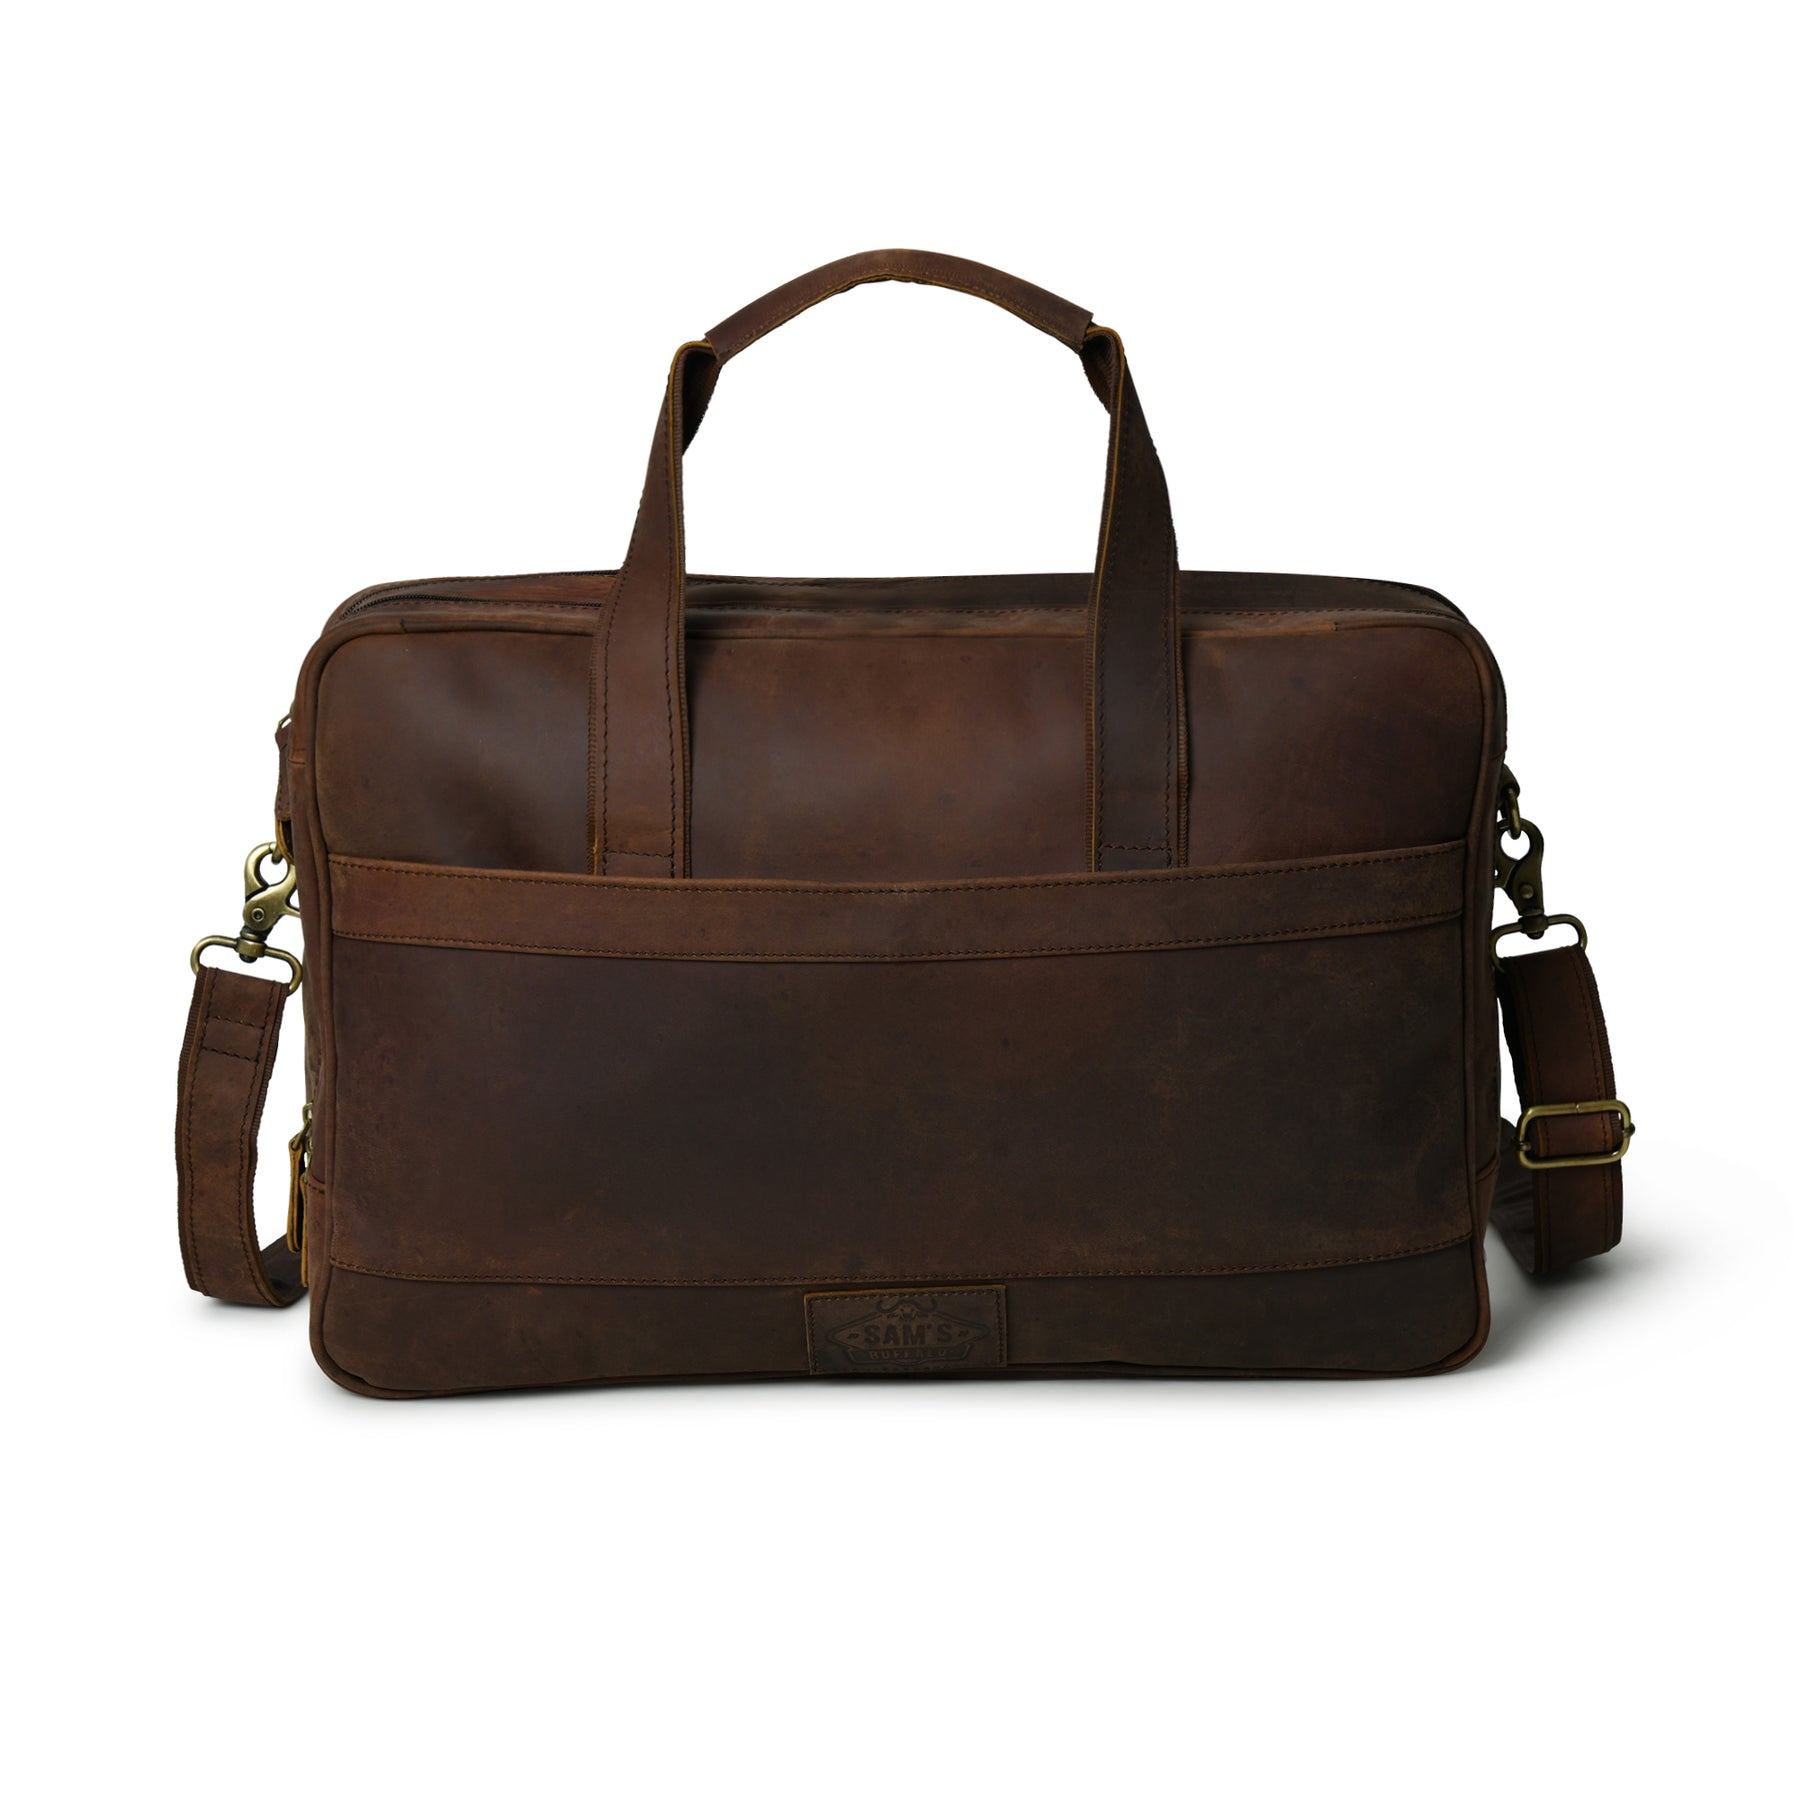 Buy Buffalo Leather Messenger Briefcase Bag Online in USA at Lowest ...